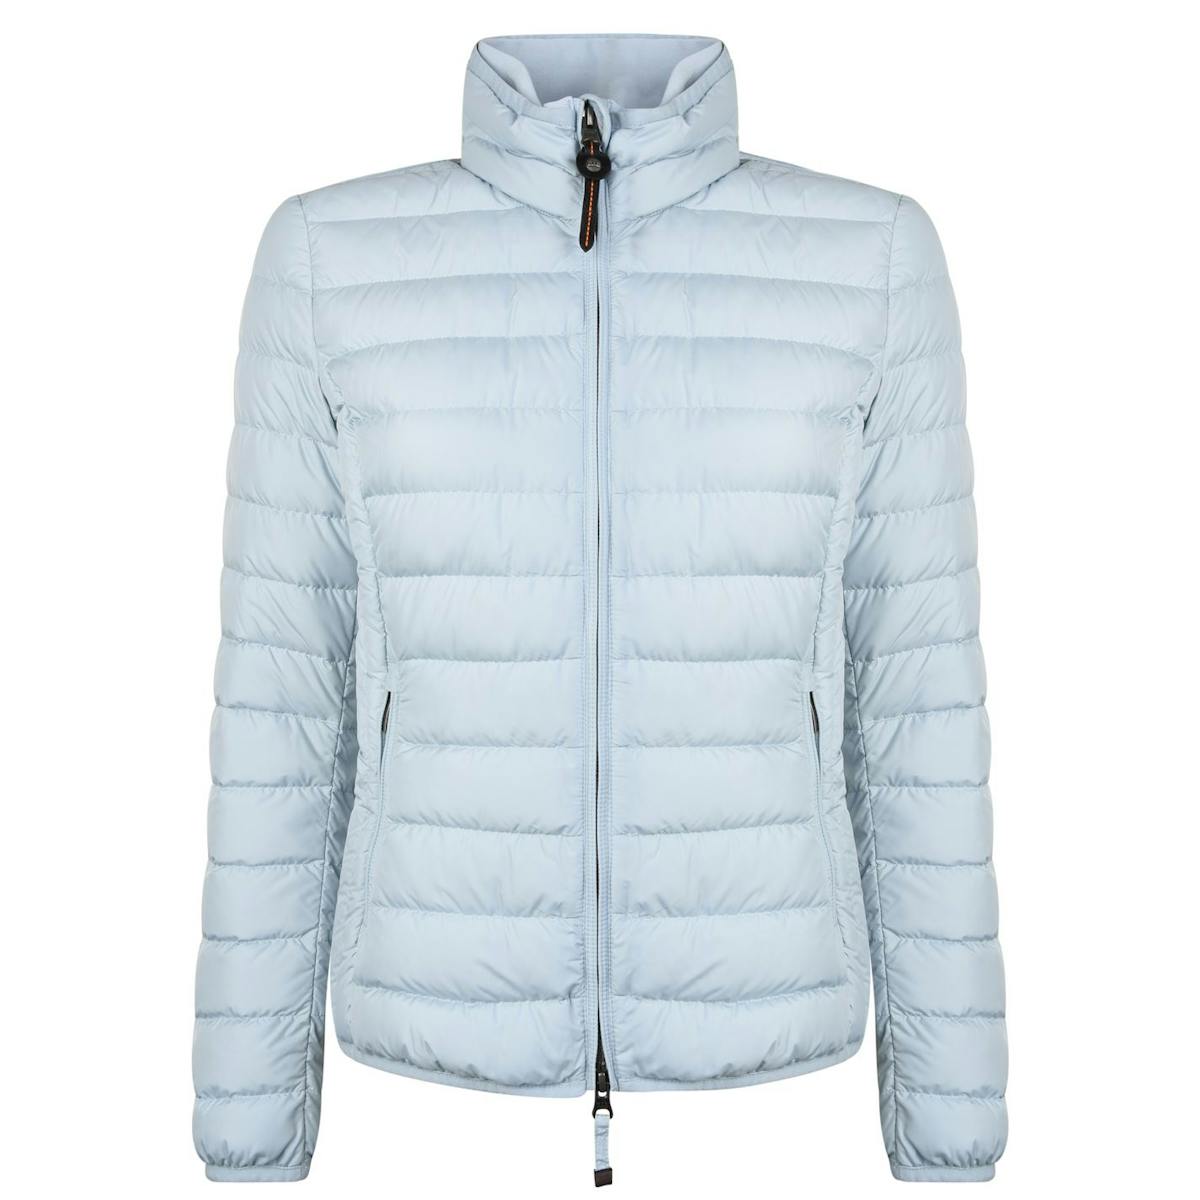 The best puffers to buy now